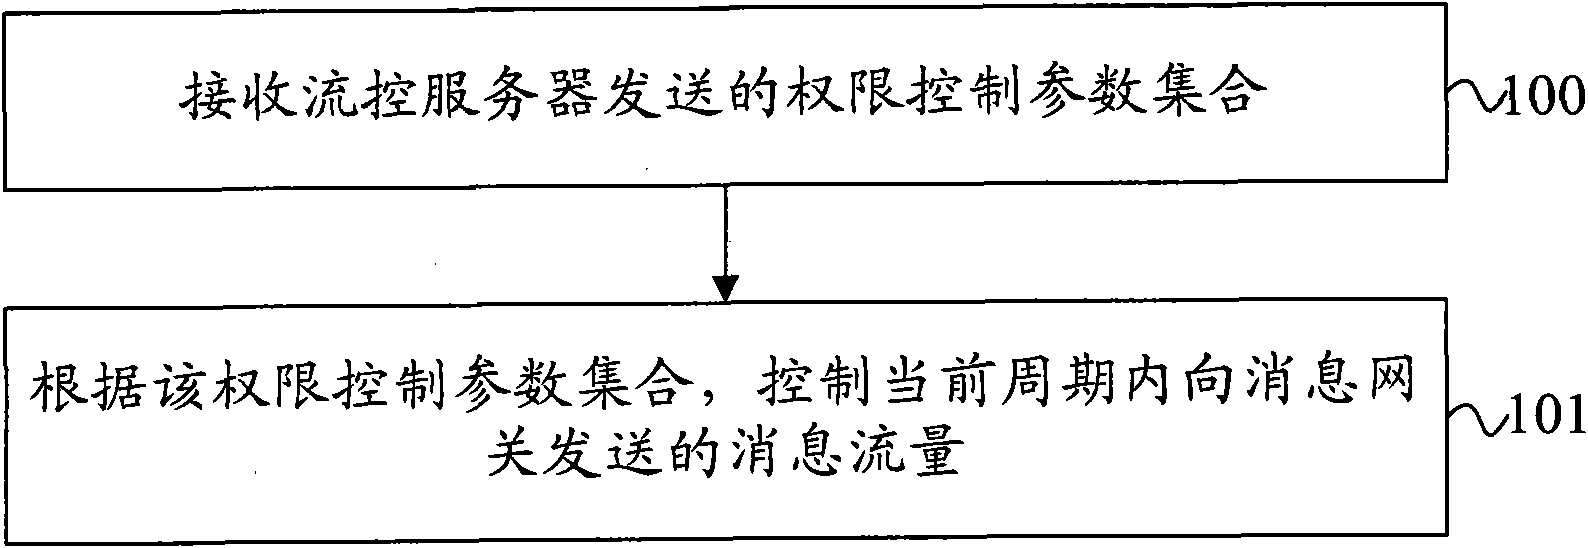 Message traffic control method, equipment and system